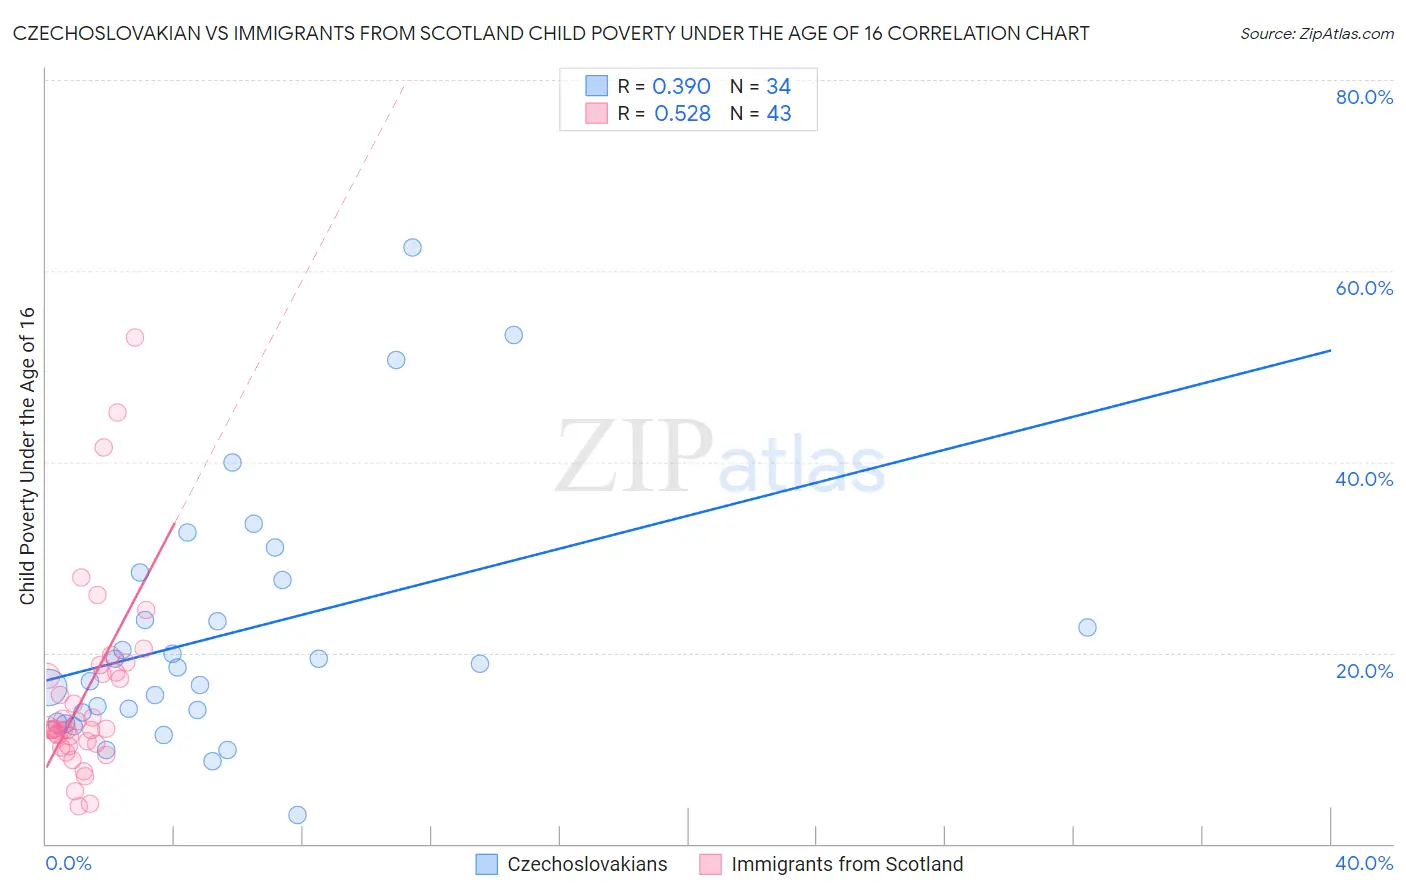 Czechoslovakian vs Immigrants from Scotland Child Poverty Under the Age of 16